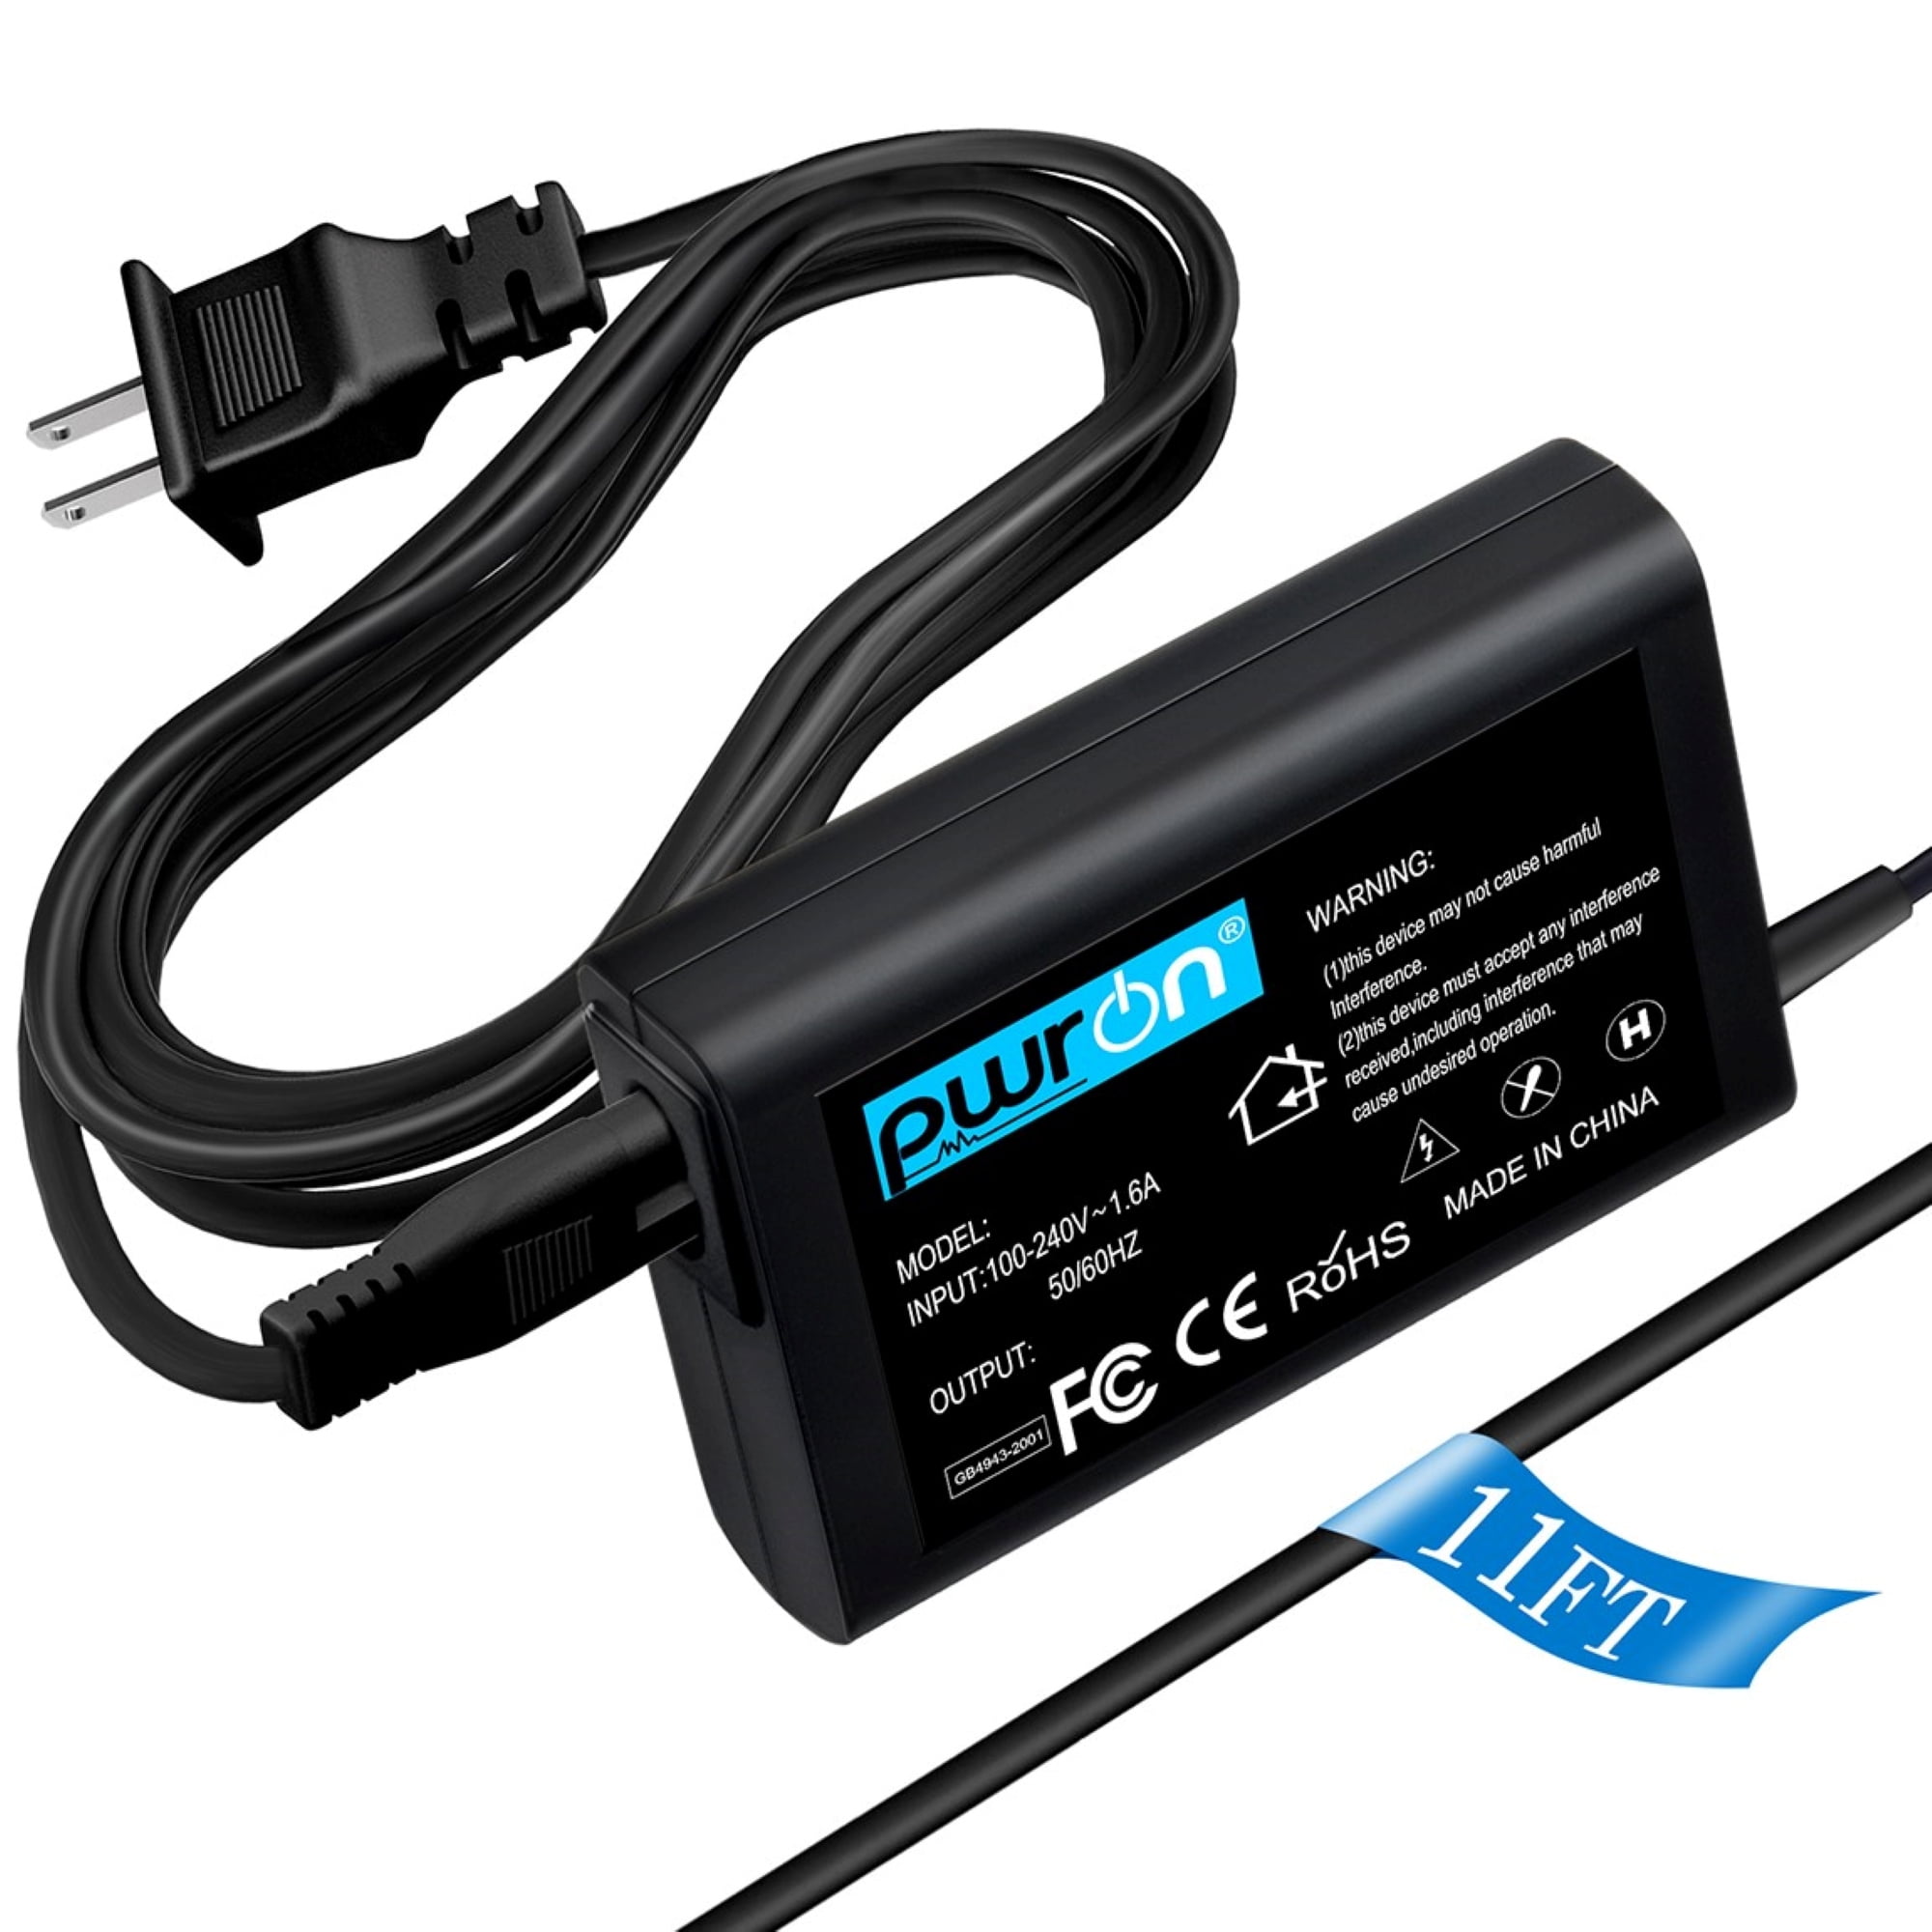 AC Power Supply Power Adapter for elo 2201L 22 Touchscreen Monitor ET2201L